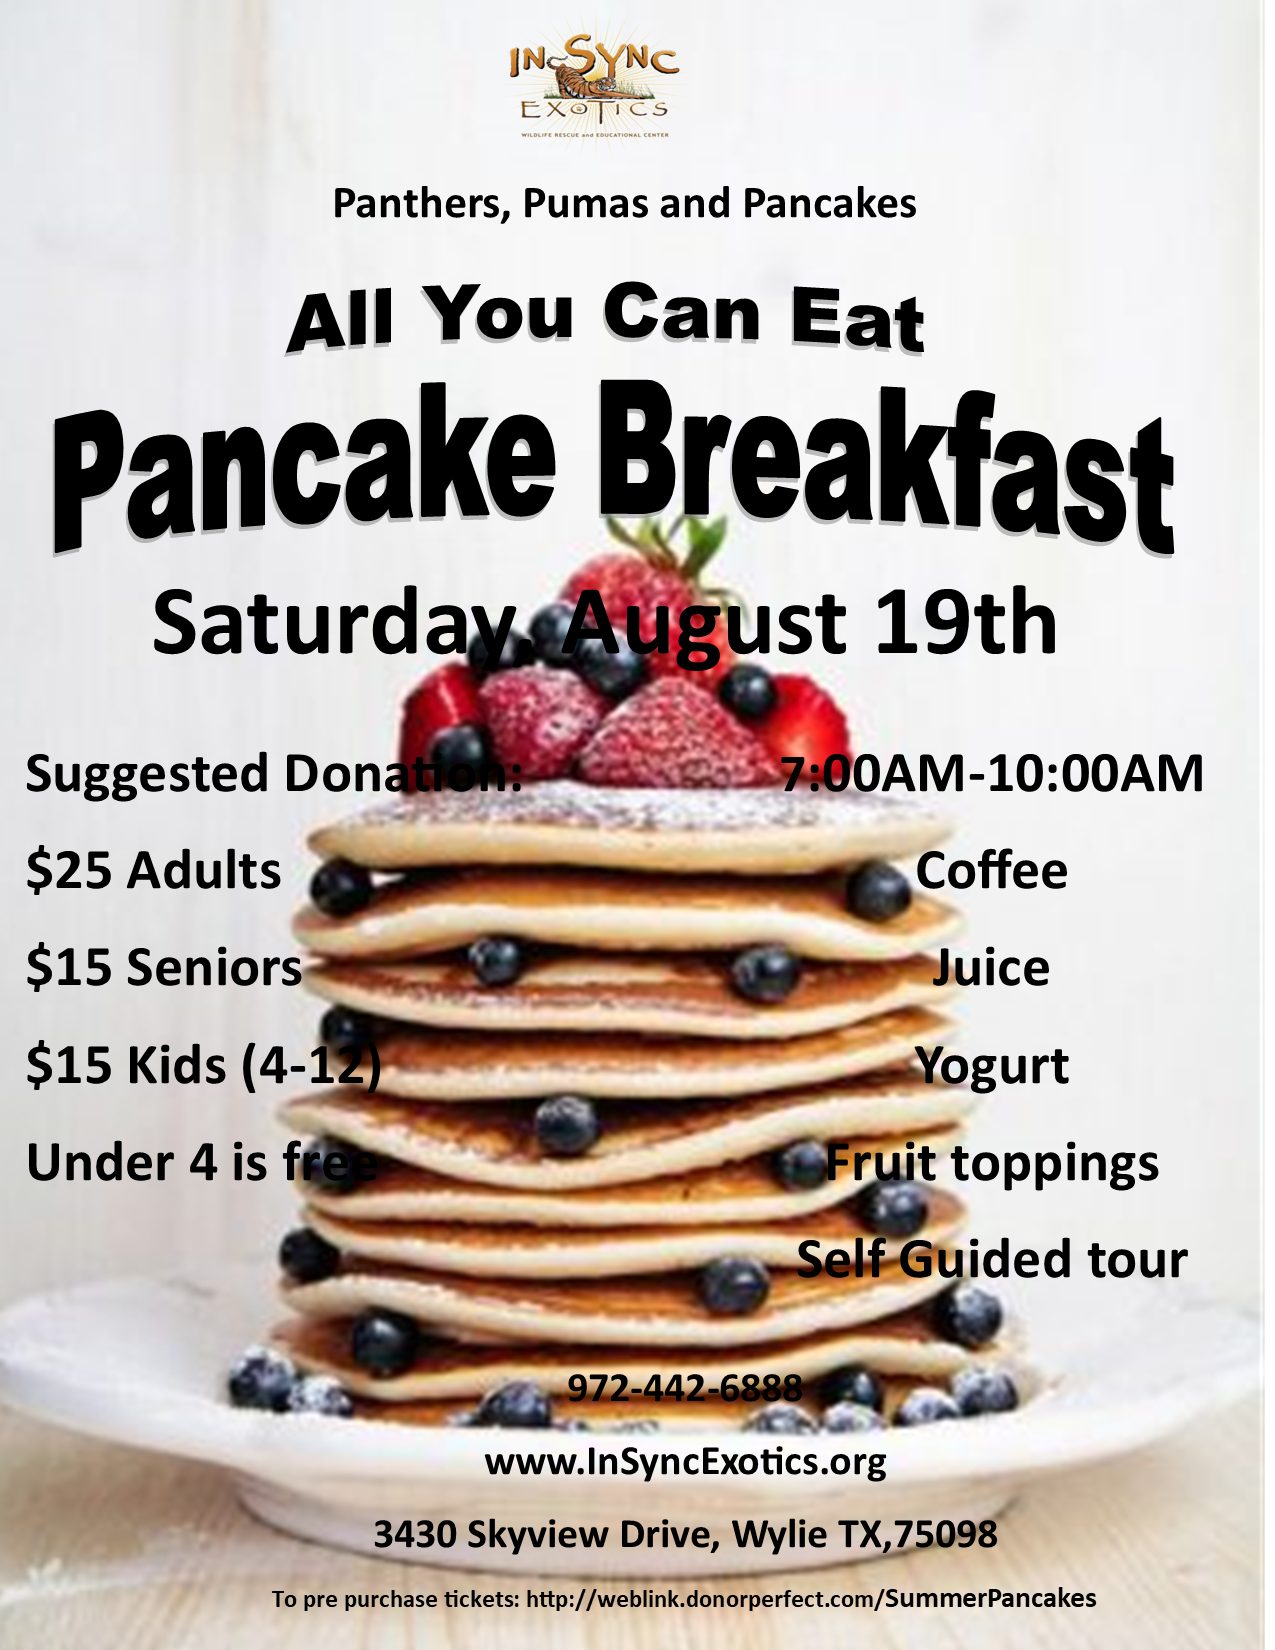 All You Can Eat Pancake Breakfast - Saturday August 19th